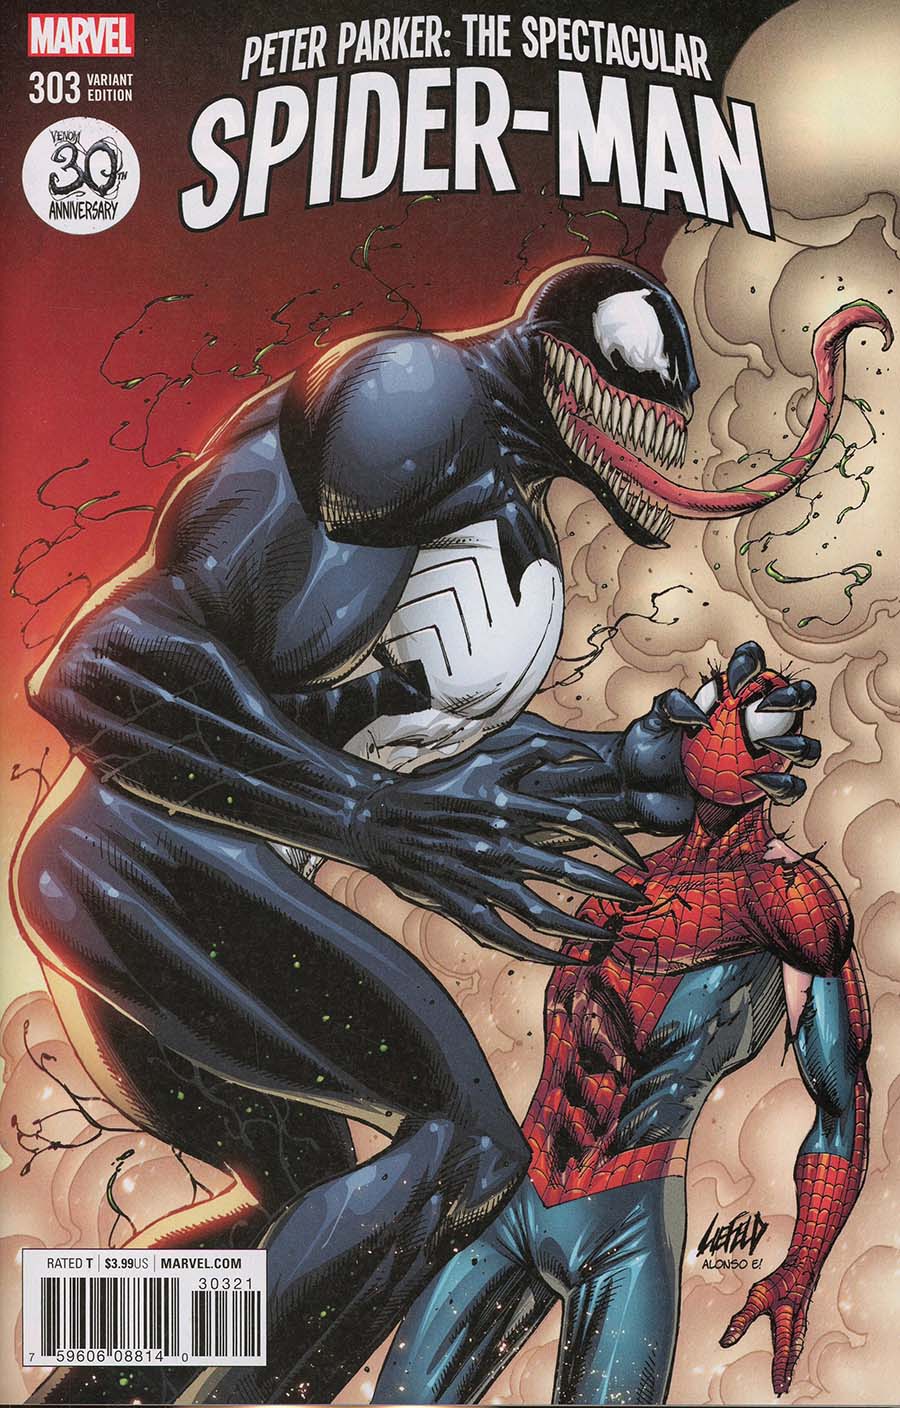 Peter Parker Spectacular Spider-Man #303 Cover B Variant Rob Liefeld Venom 30th Anniversary Cover